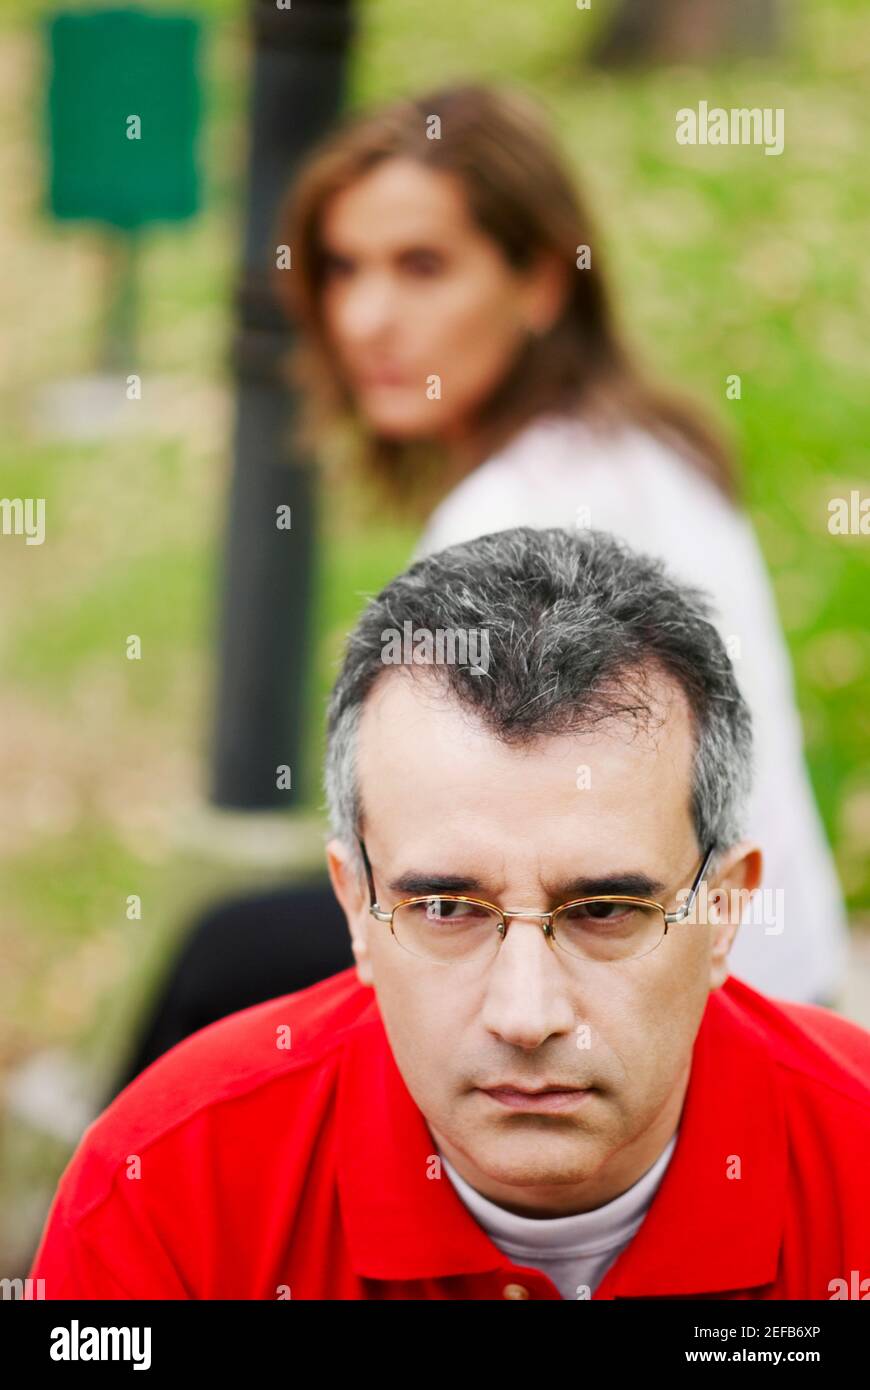 Close-up of a mid adult man looking sad with a mid adult woman sitting behind him Stock Photo